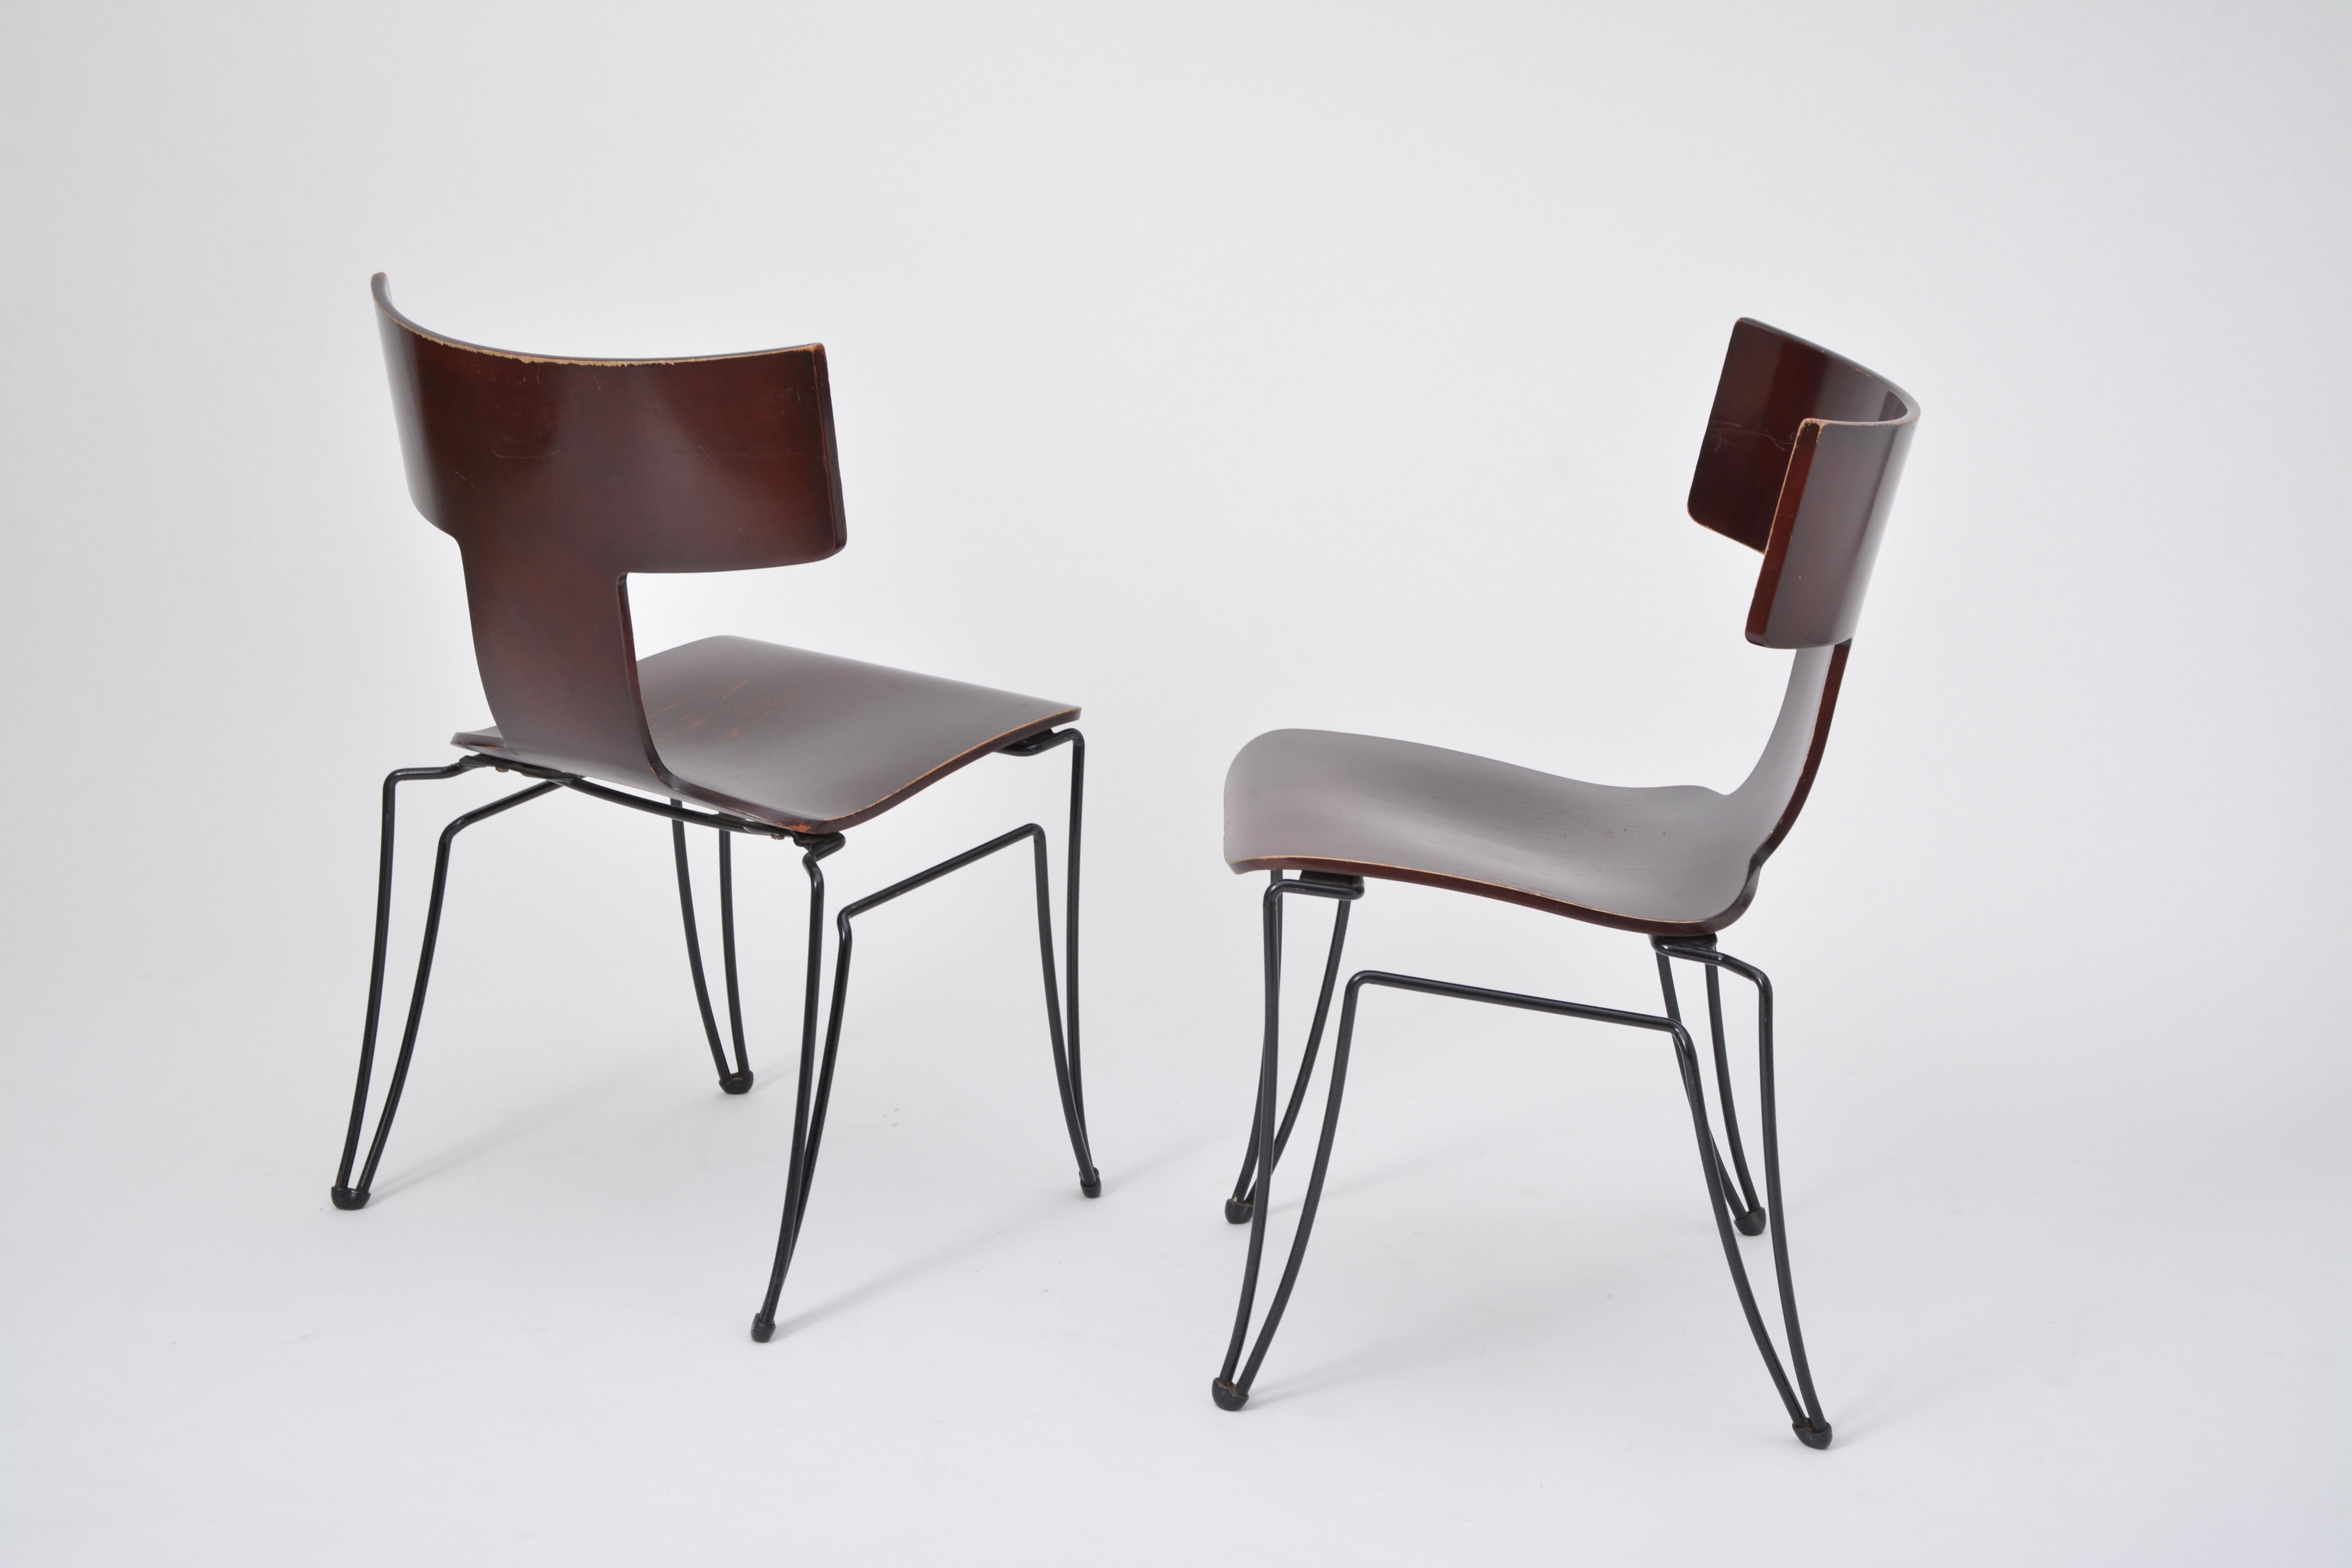 This set of six chairs was produced by Donghia in the 1980s. The model Anziano was designed by John Hutton. The structures are made of black coated steelwire, the seats are made of molded beechwood veneer. The chairs are stackable.